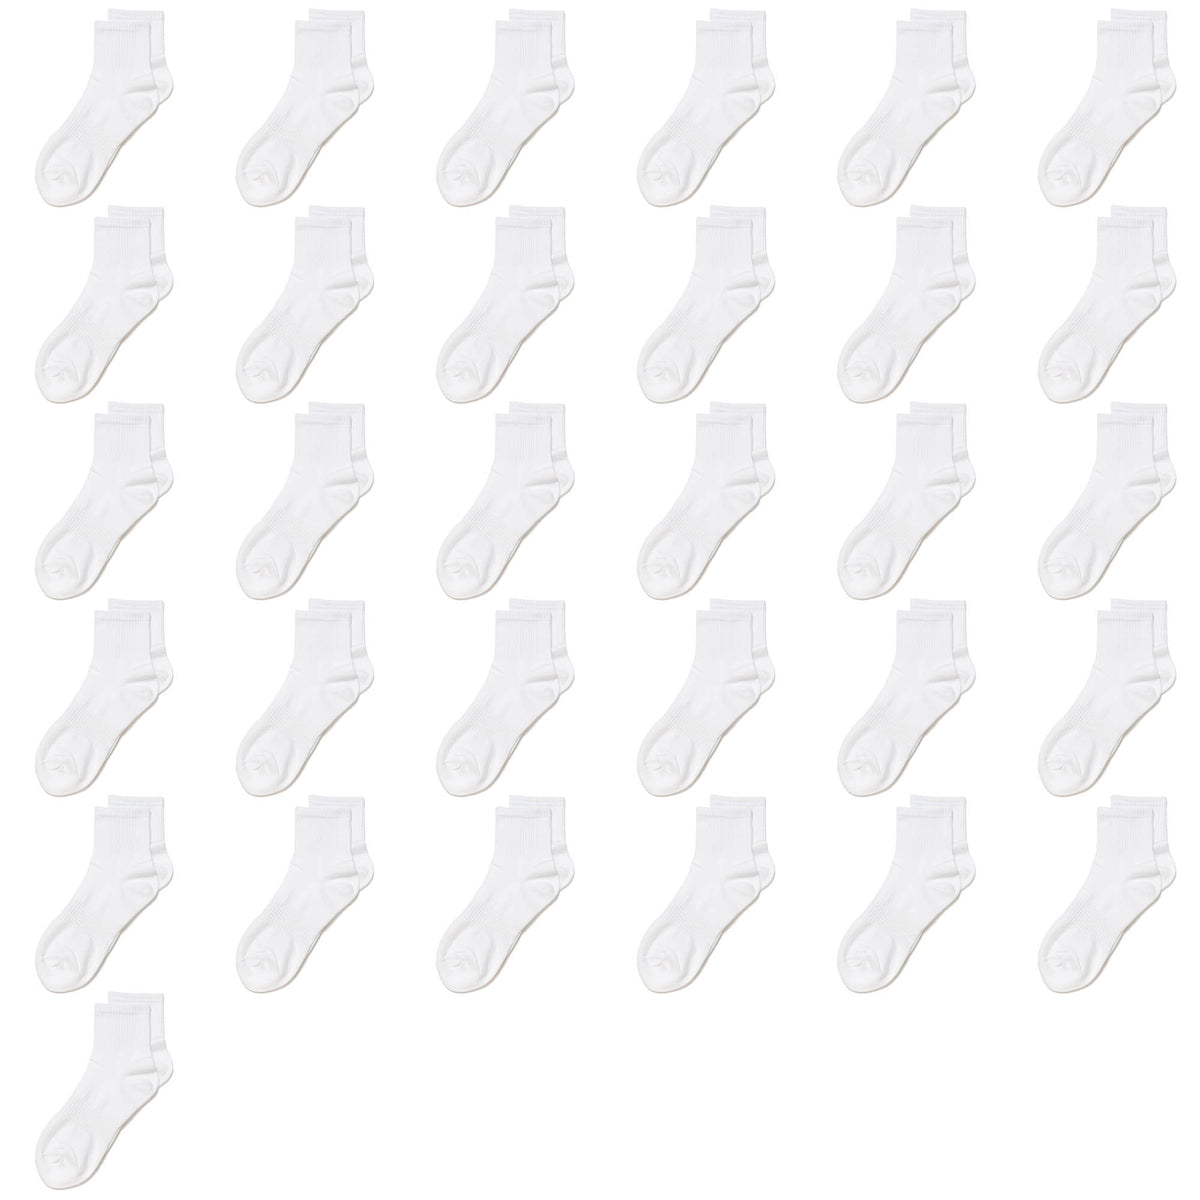 31 Pairs of High Cotton Mid Ankle Men's Socks